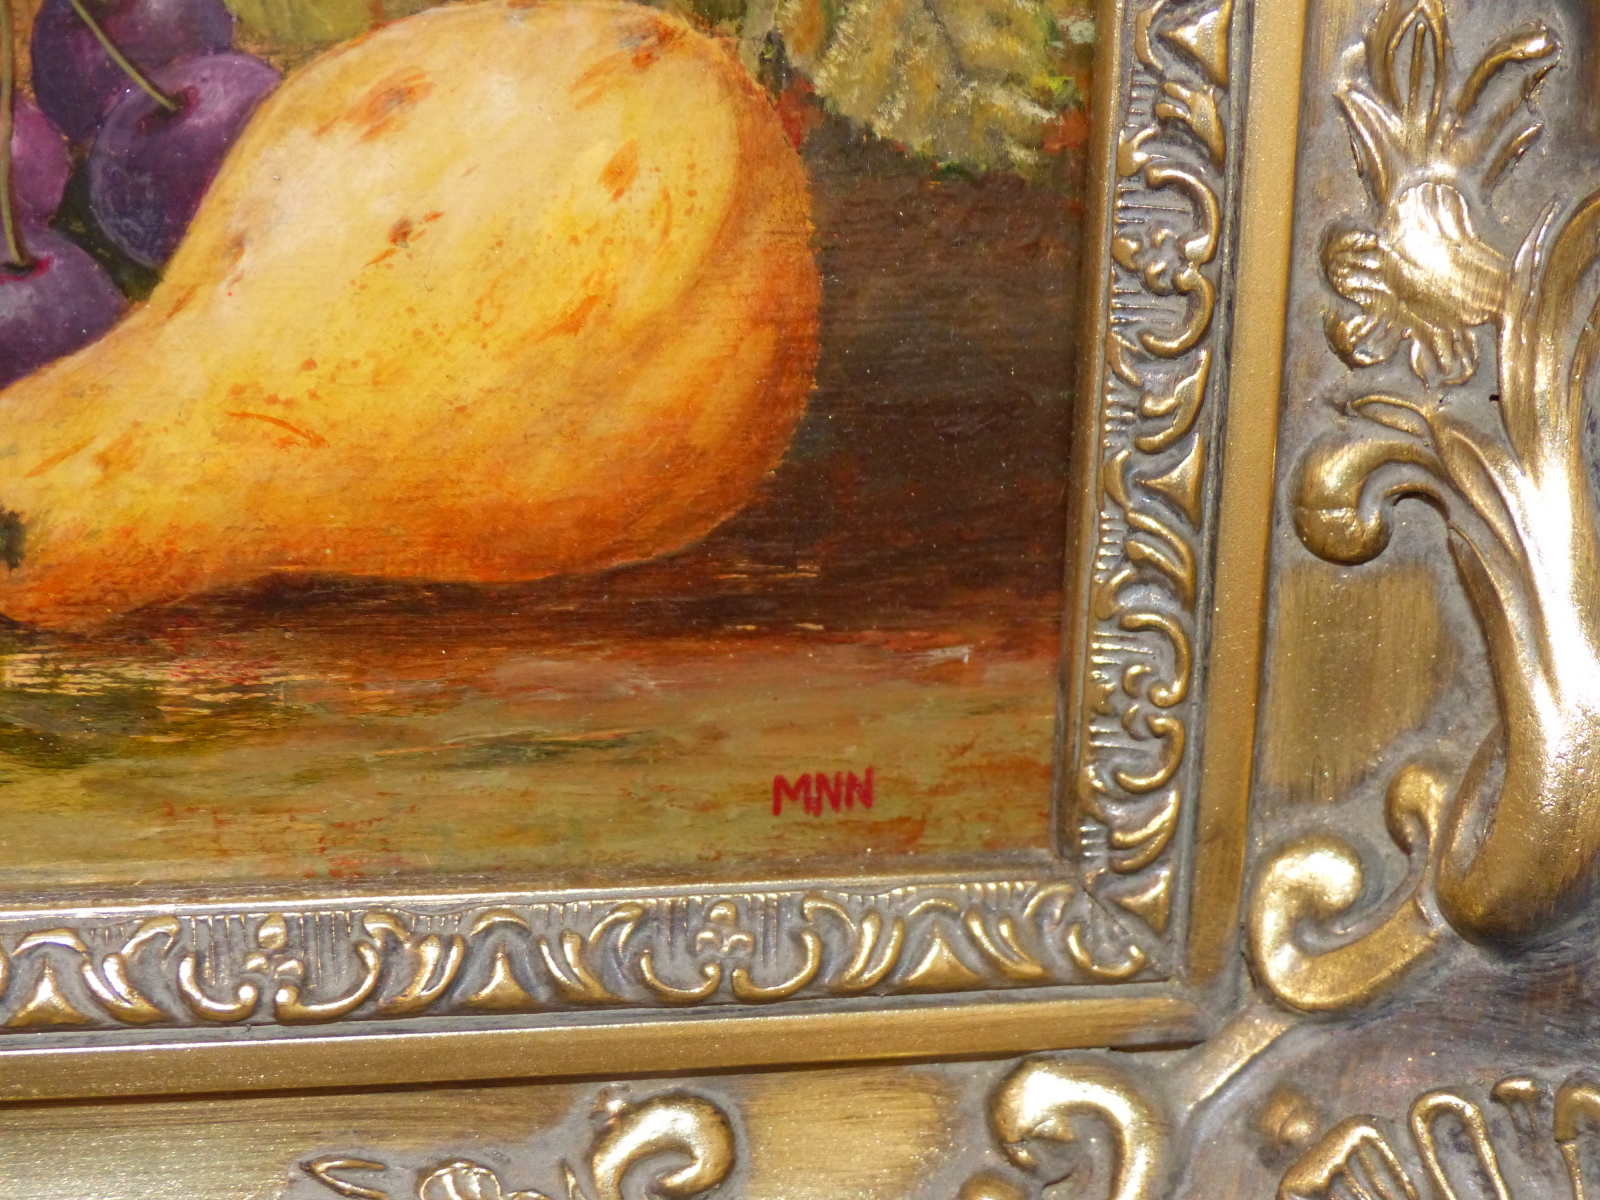 MARTIN NASH (CONTEMPORARY SCHOOL) A DECORATIVE STILL LIFE PAINTING, INITIALLED, OIL ON BOARD. 20 x - Image 3 of 4